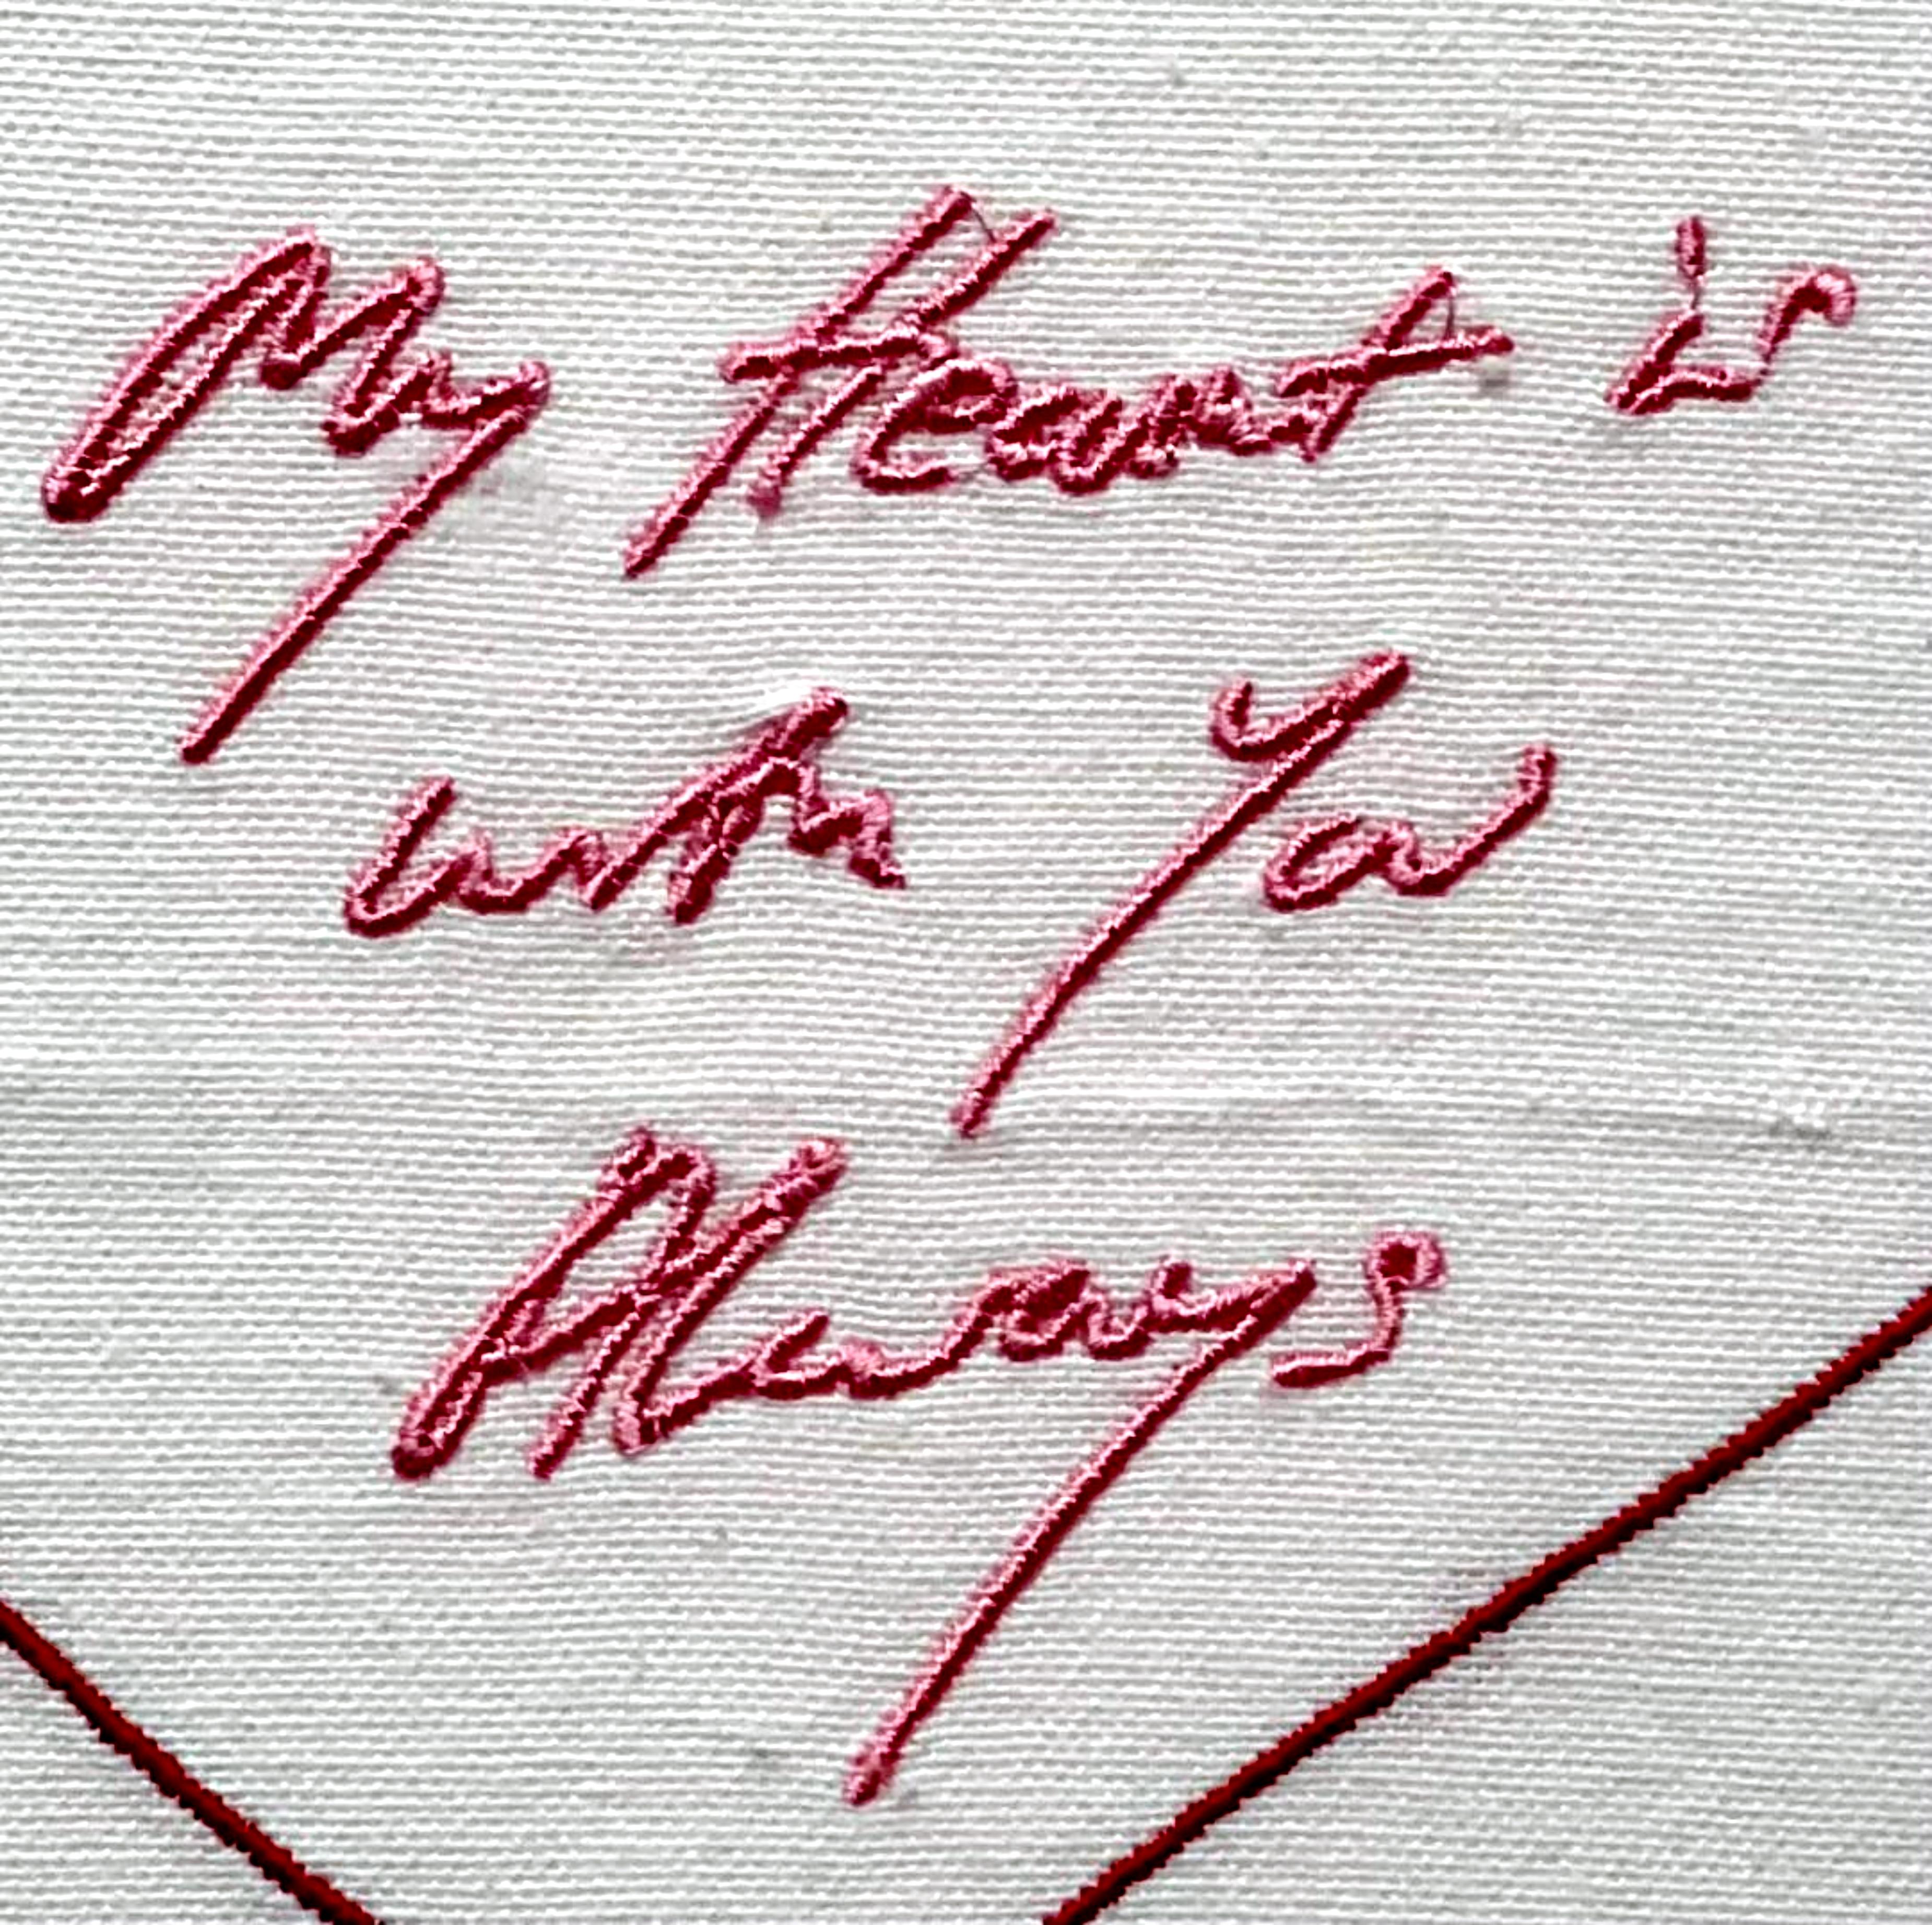 Tracey Emin
My Heart is With You Always, framed with hand signed and inscribed tag, 2015
Embroidered Linen Handkerchief, Hand Signed, dated and Inscribed in Ink on attached tag
Signed, inscribed 